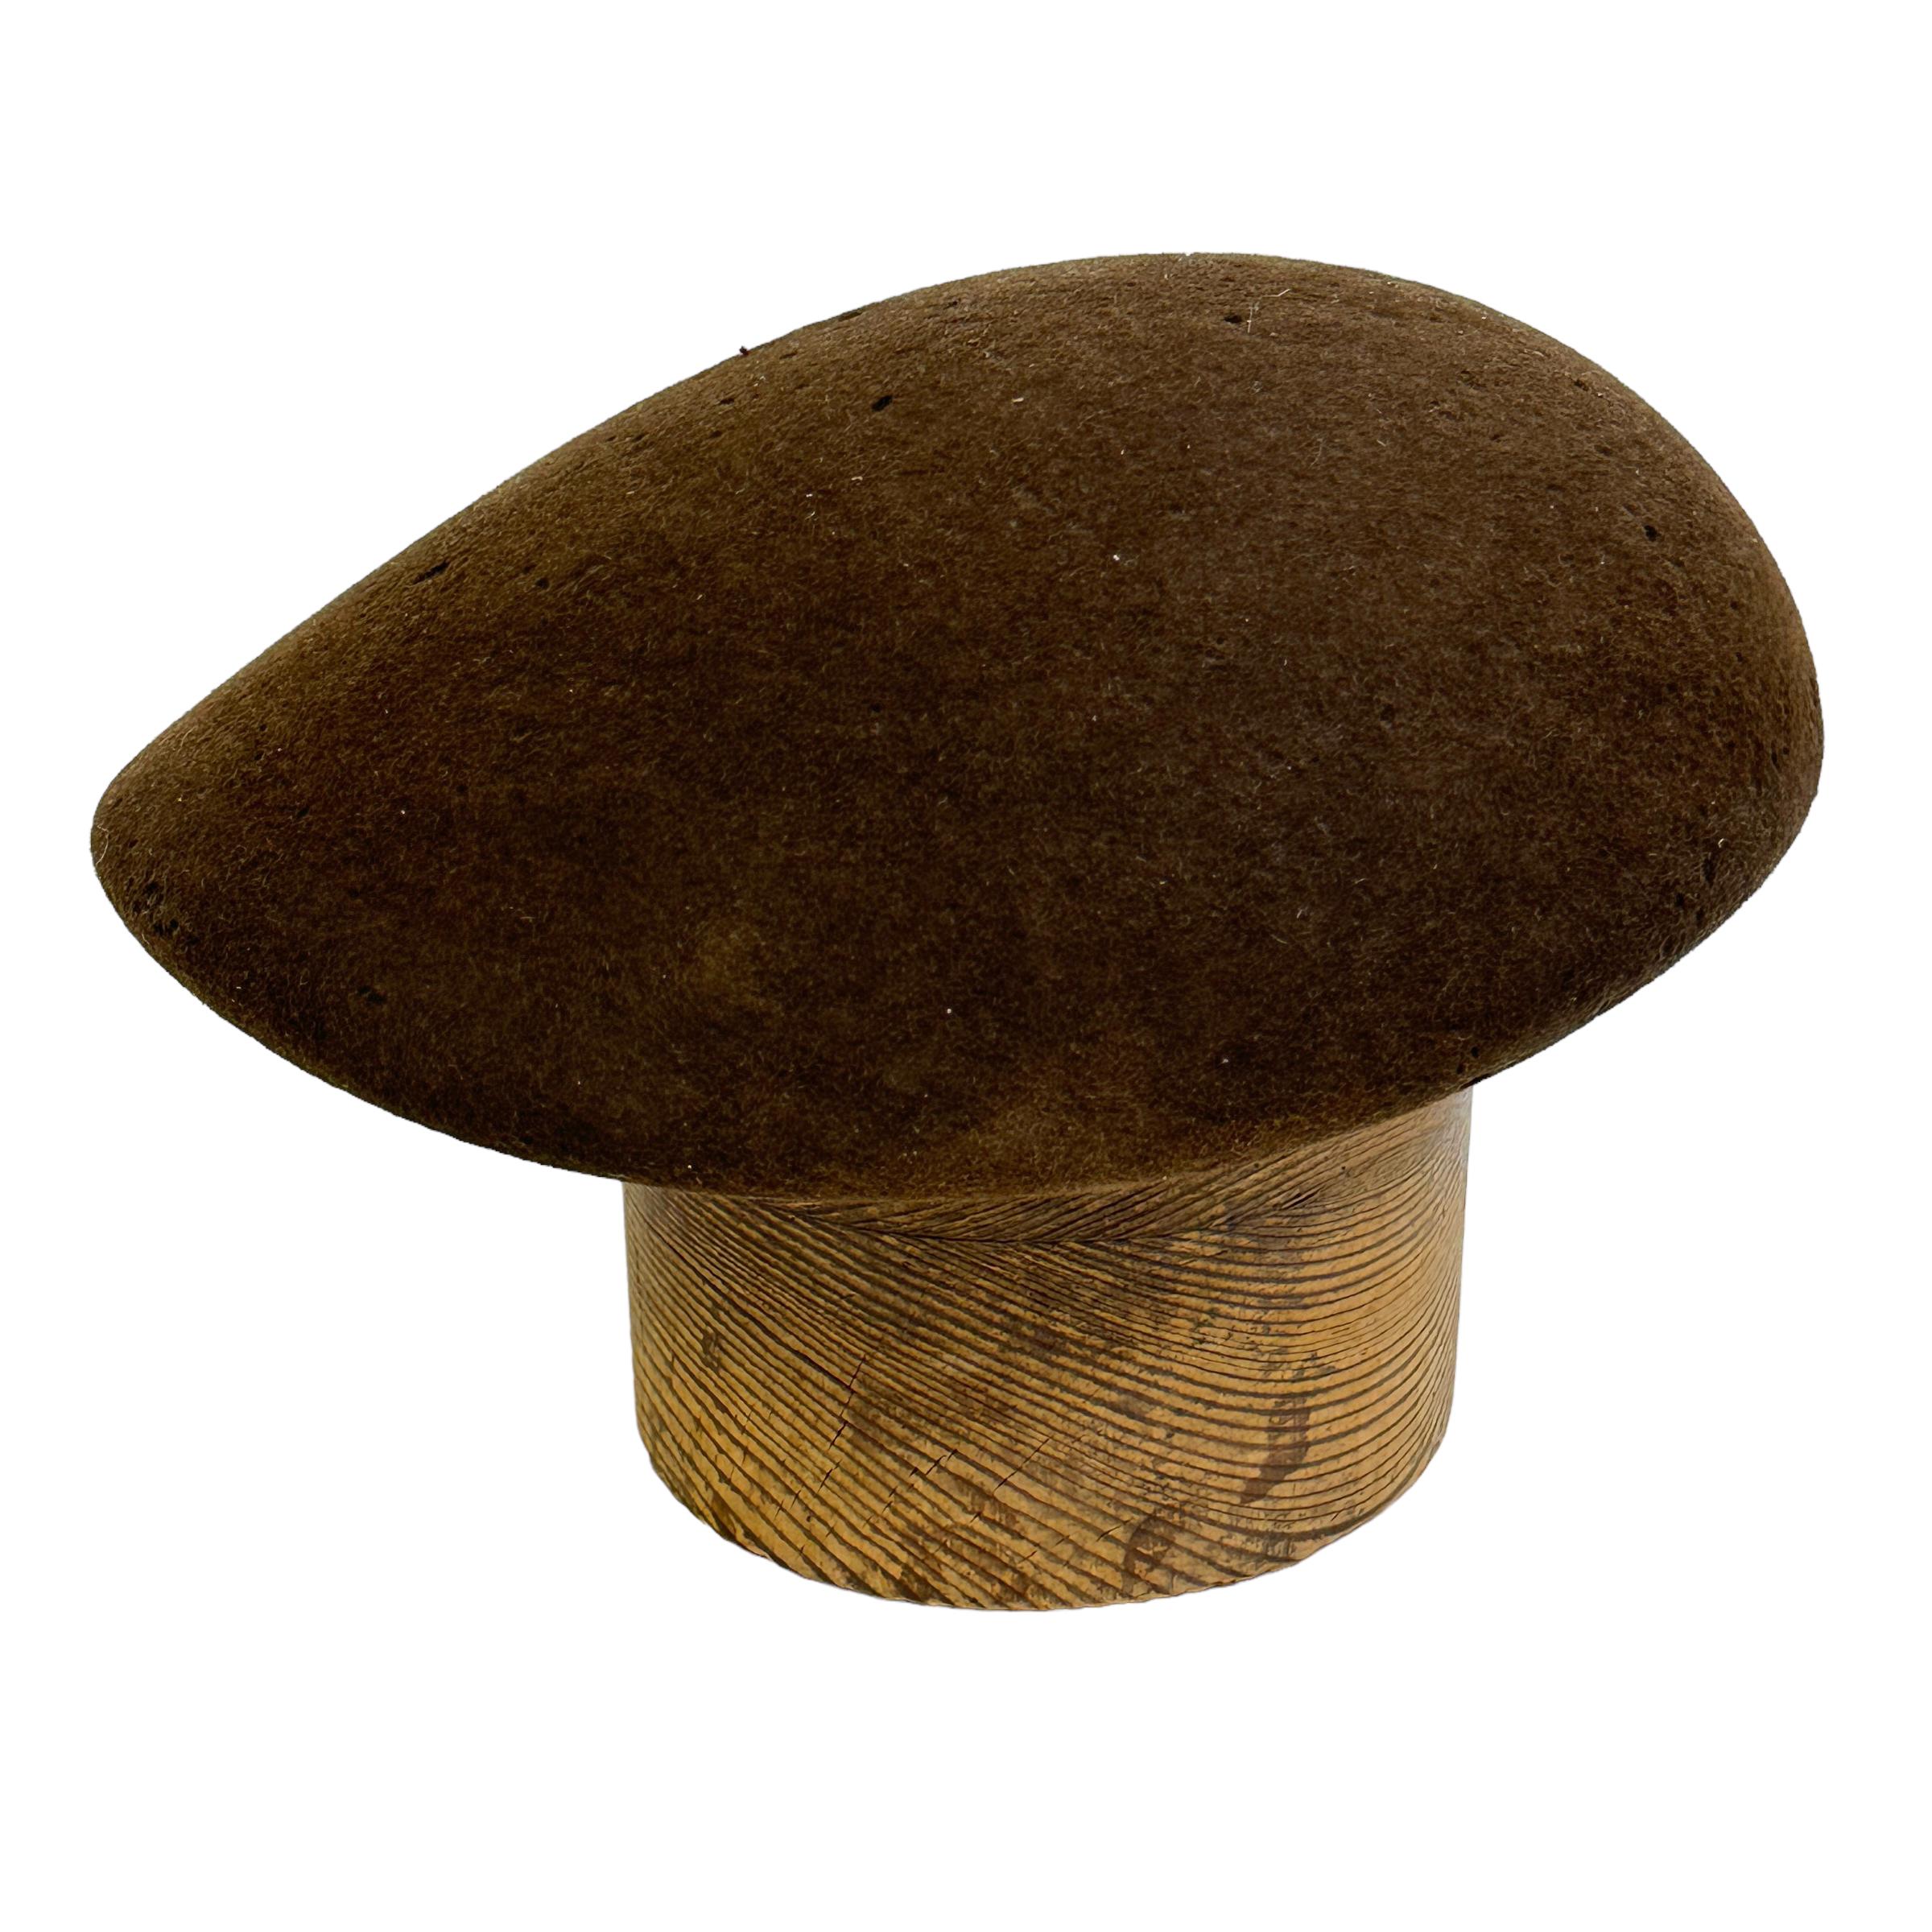 Stunning beautiful wooden and felt hat form mold, found at an estate sale in Vienna, Austria. Has the form of the typical Art Deco style. So we believe it was made in the 1930s. Nice decoration item or a beautiful stand to display your hat in the